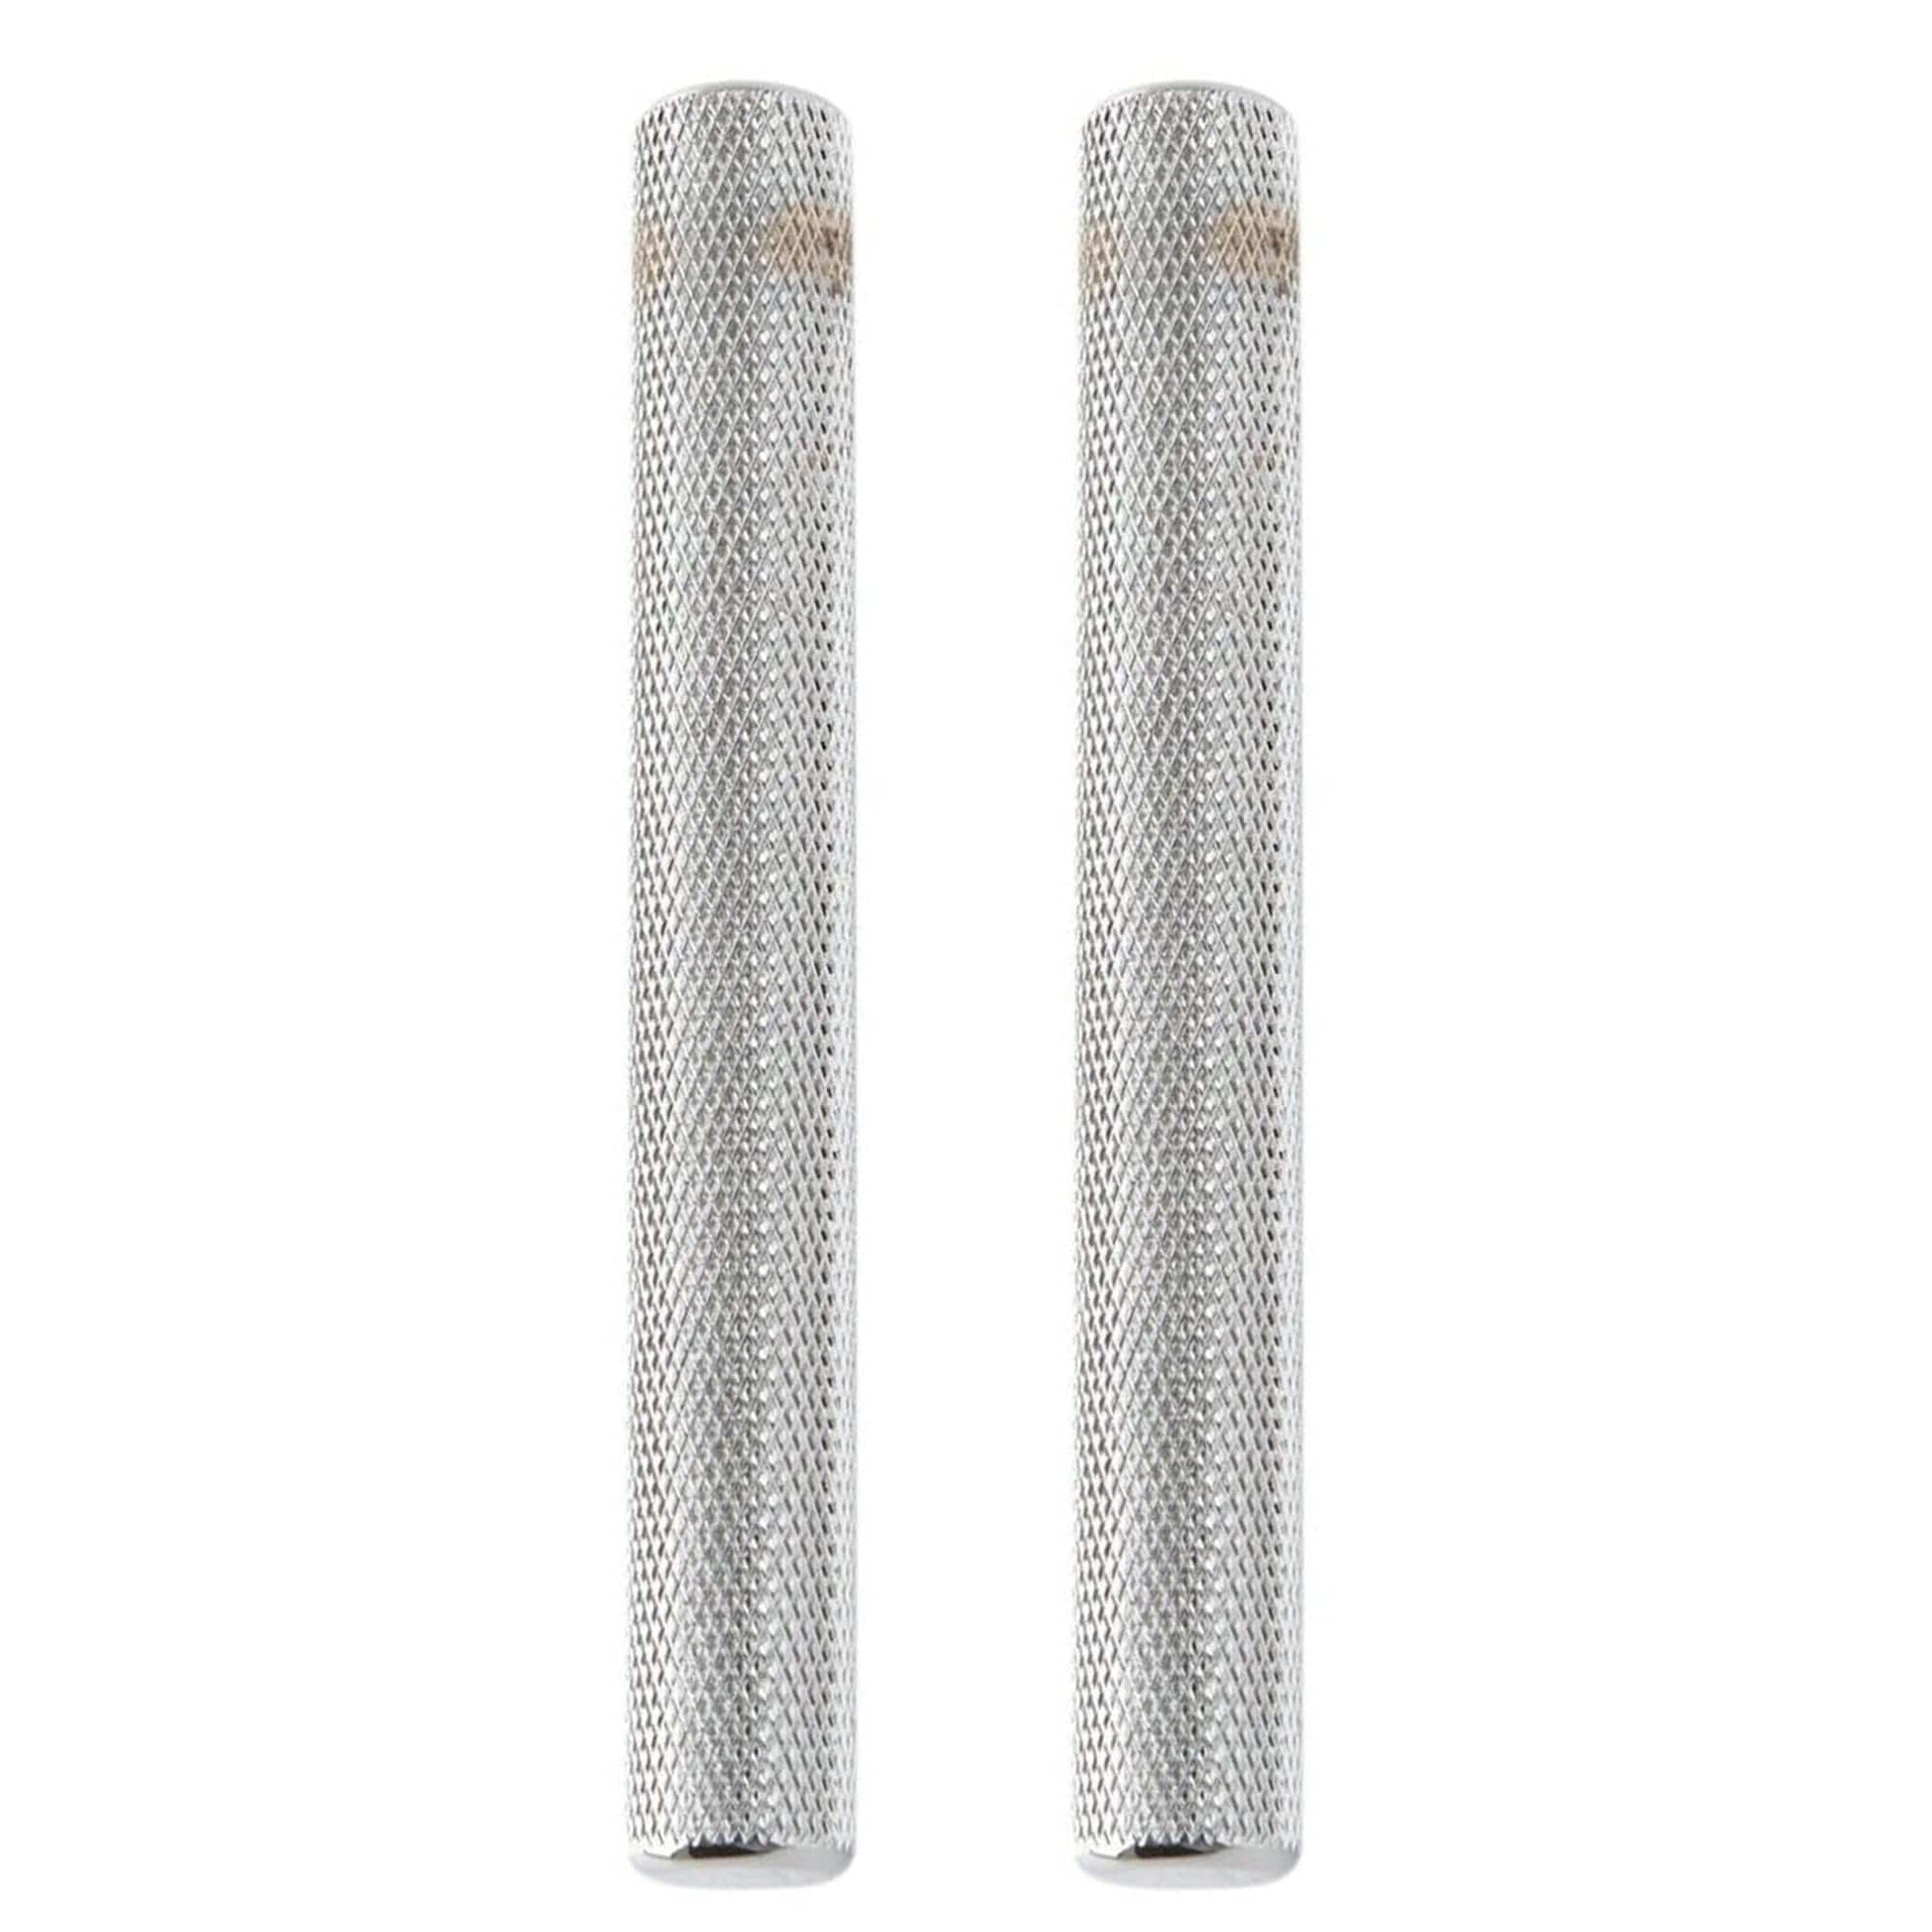 Ludwig Atlas Pro 4" (100mm) Accessory Rod 12mm (2 Pack Bundle) Drums and Percussion / Parts and Accessories / Drum Parts